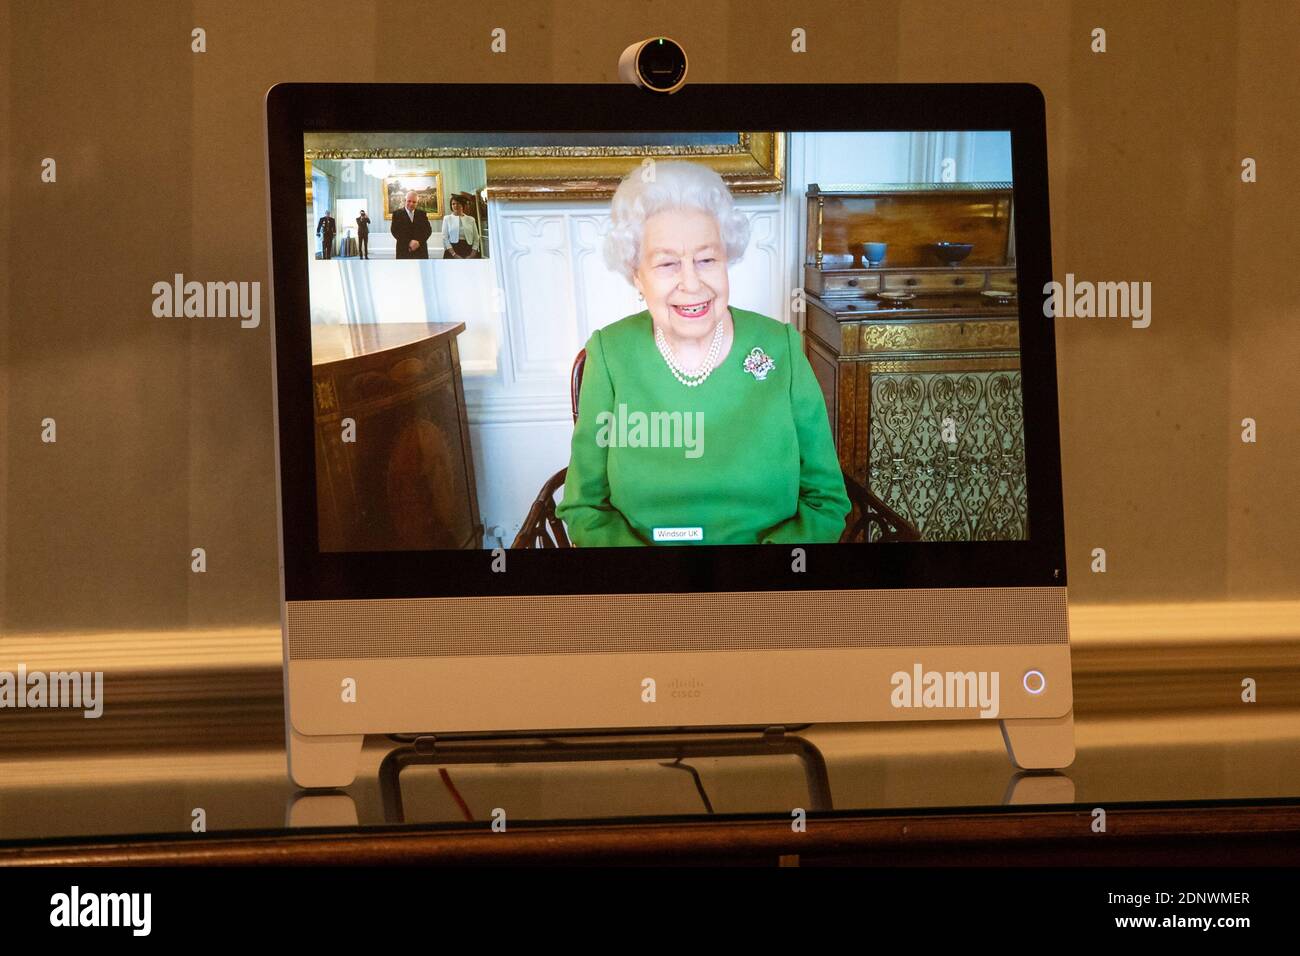 Britain's Queen Elizabeth appears on a screen by videolink from Windsor Castle, where she is in residence, during a virtual audience to receive Ambassador of Belgium Bruno van der Pluijm and Hildegarde Van de Voorde who attended at Buckingham Palace in London, Britain December 18, 2020. Dominic Lipinski/PA Wire/Pool via REUTERS Stock Photo